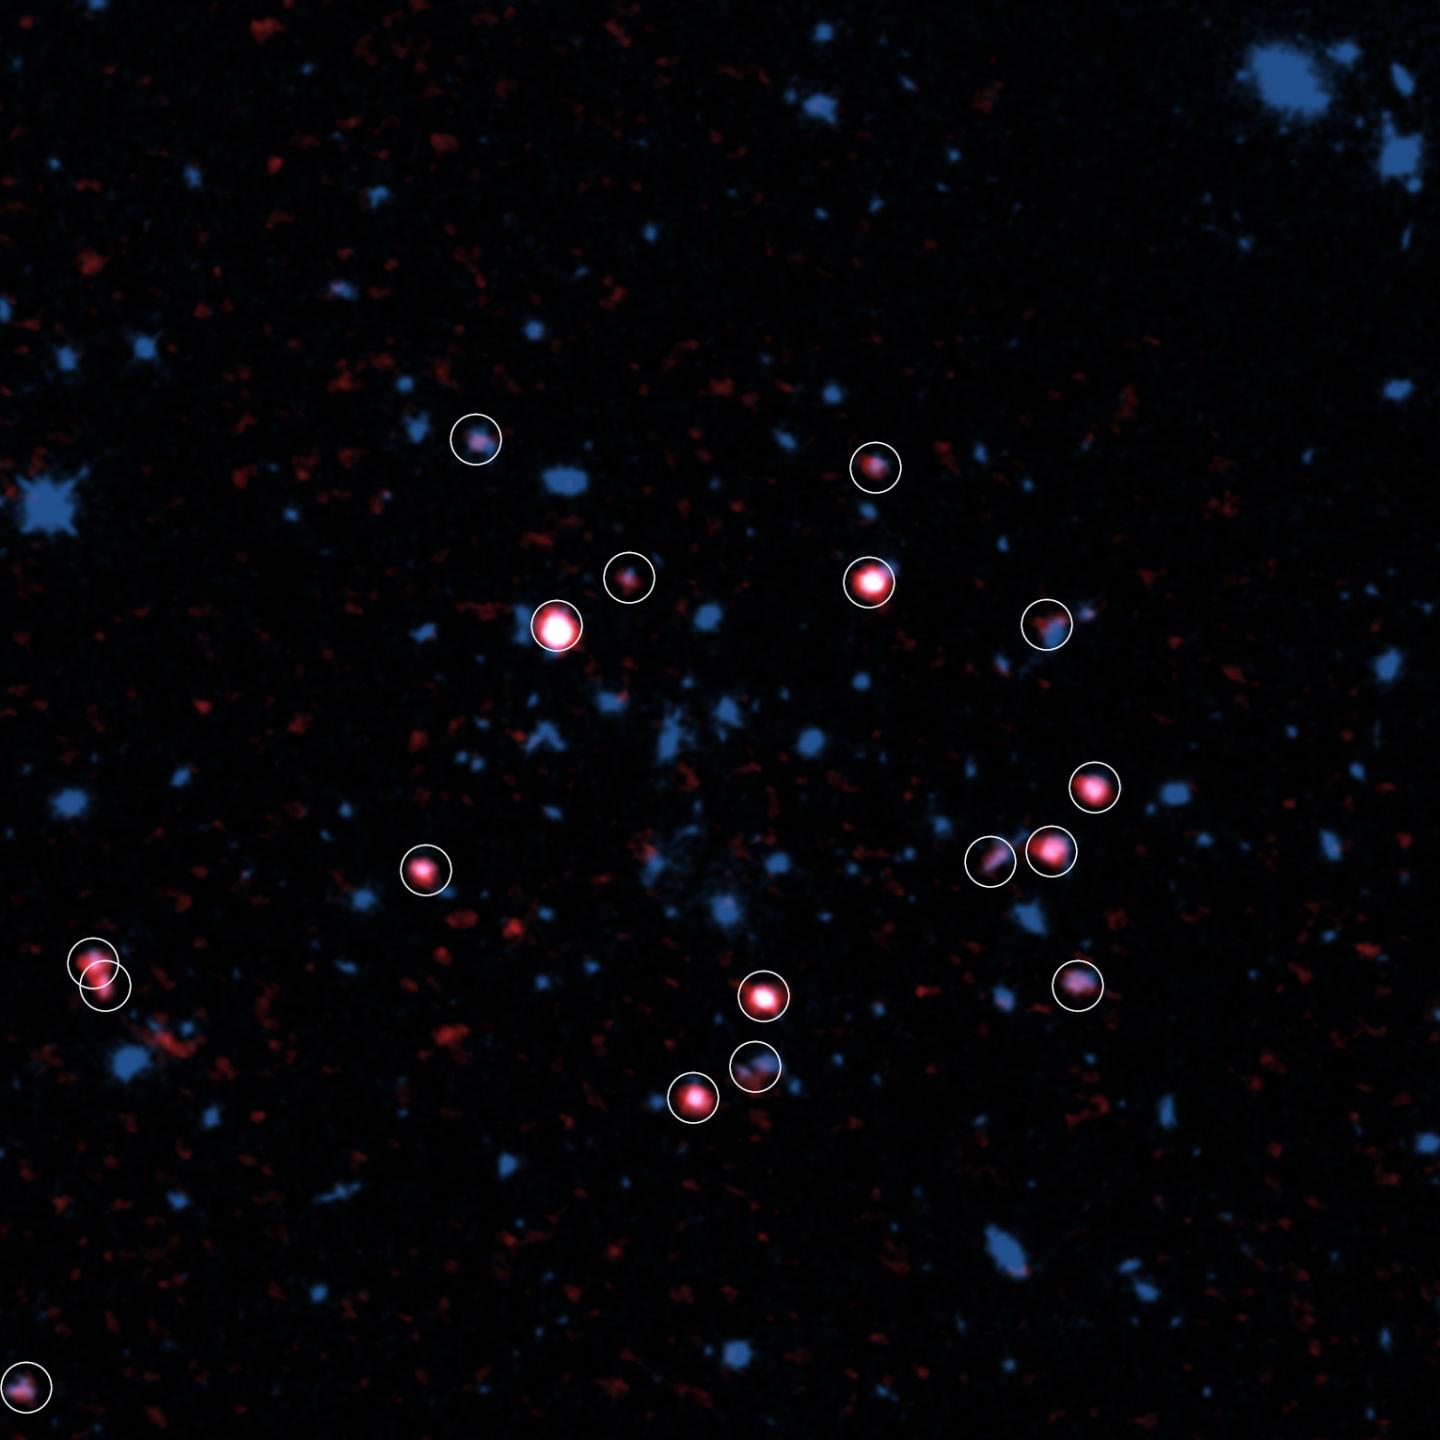 Galaxy Cluster XMMXCS J2215.9-1738 Observed with ALMA and the Hubble Space Telescope